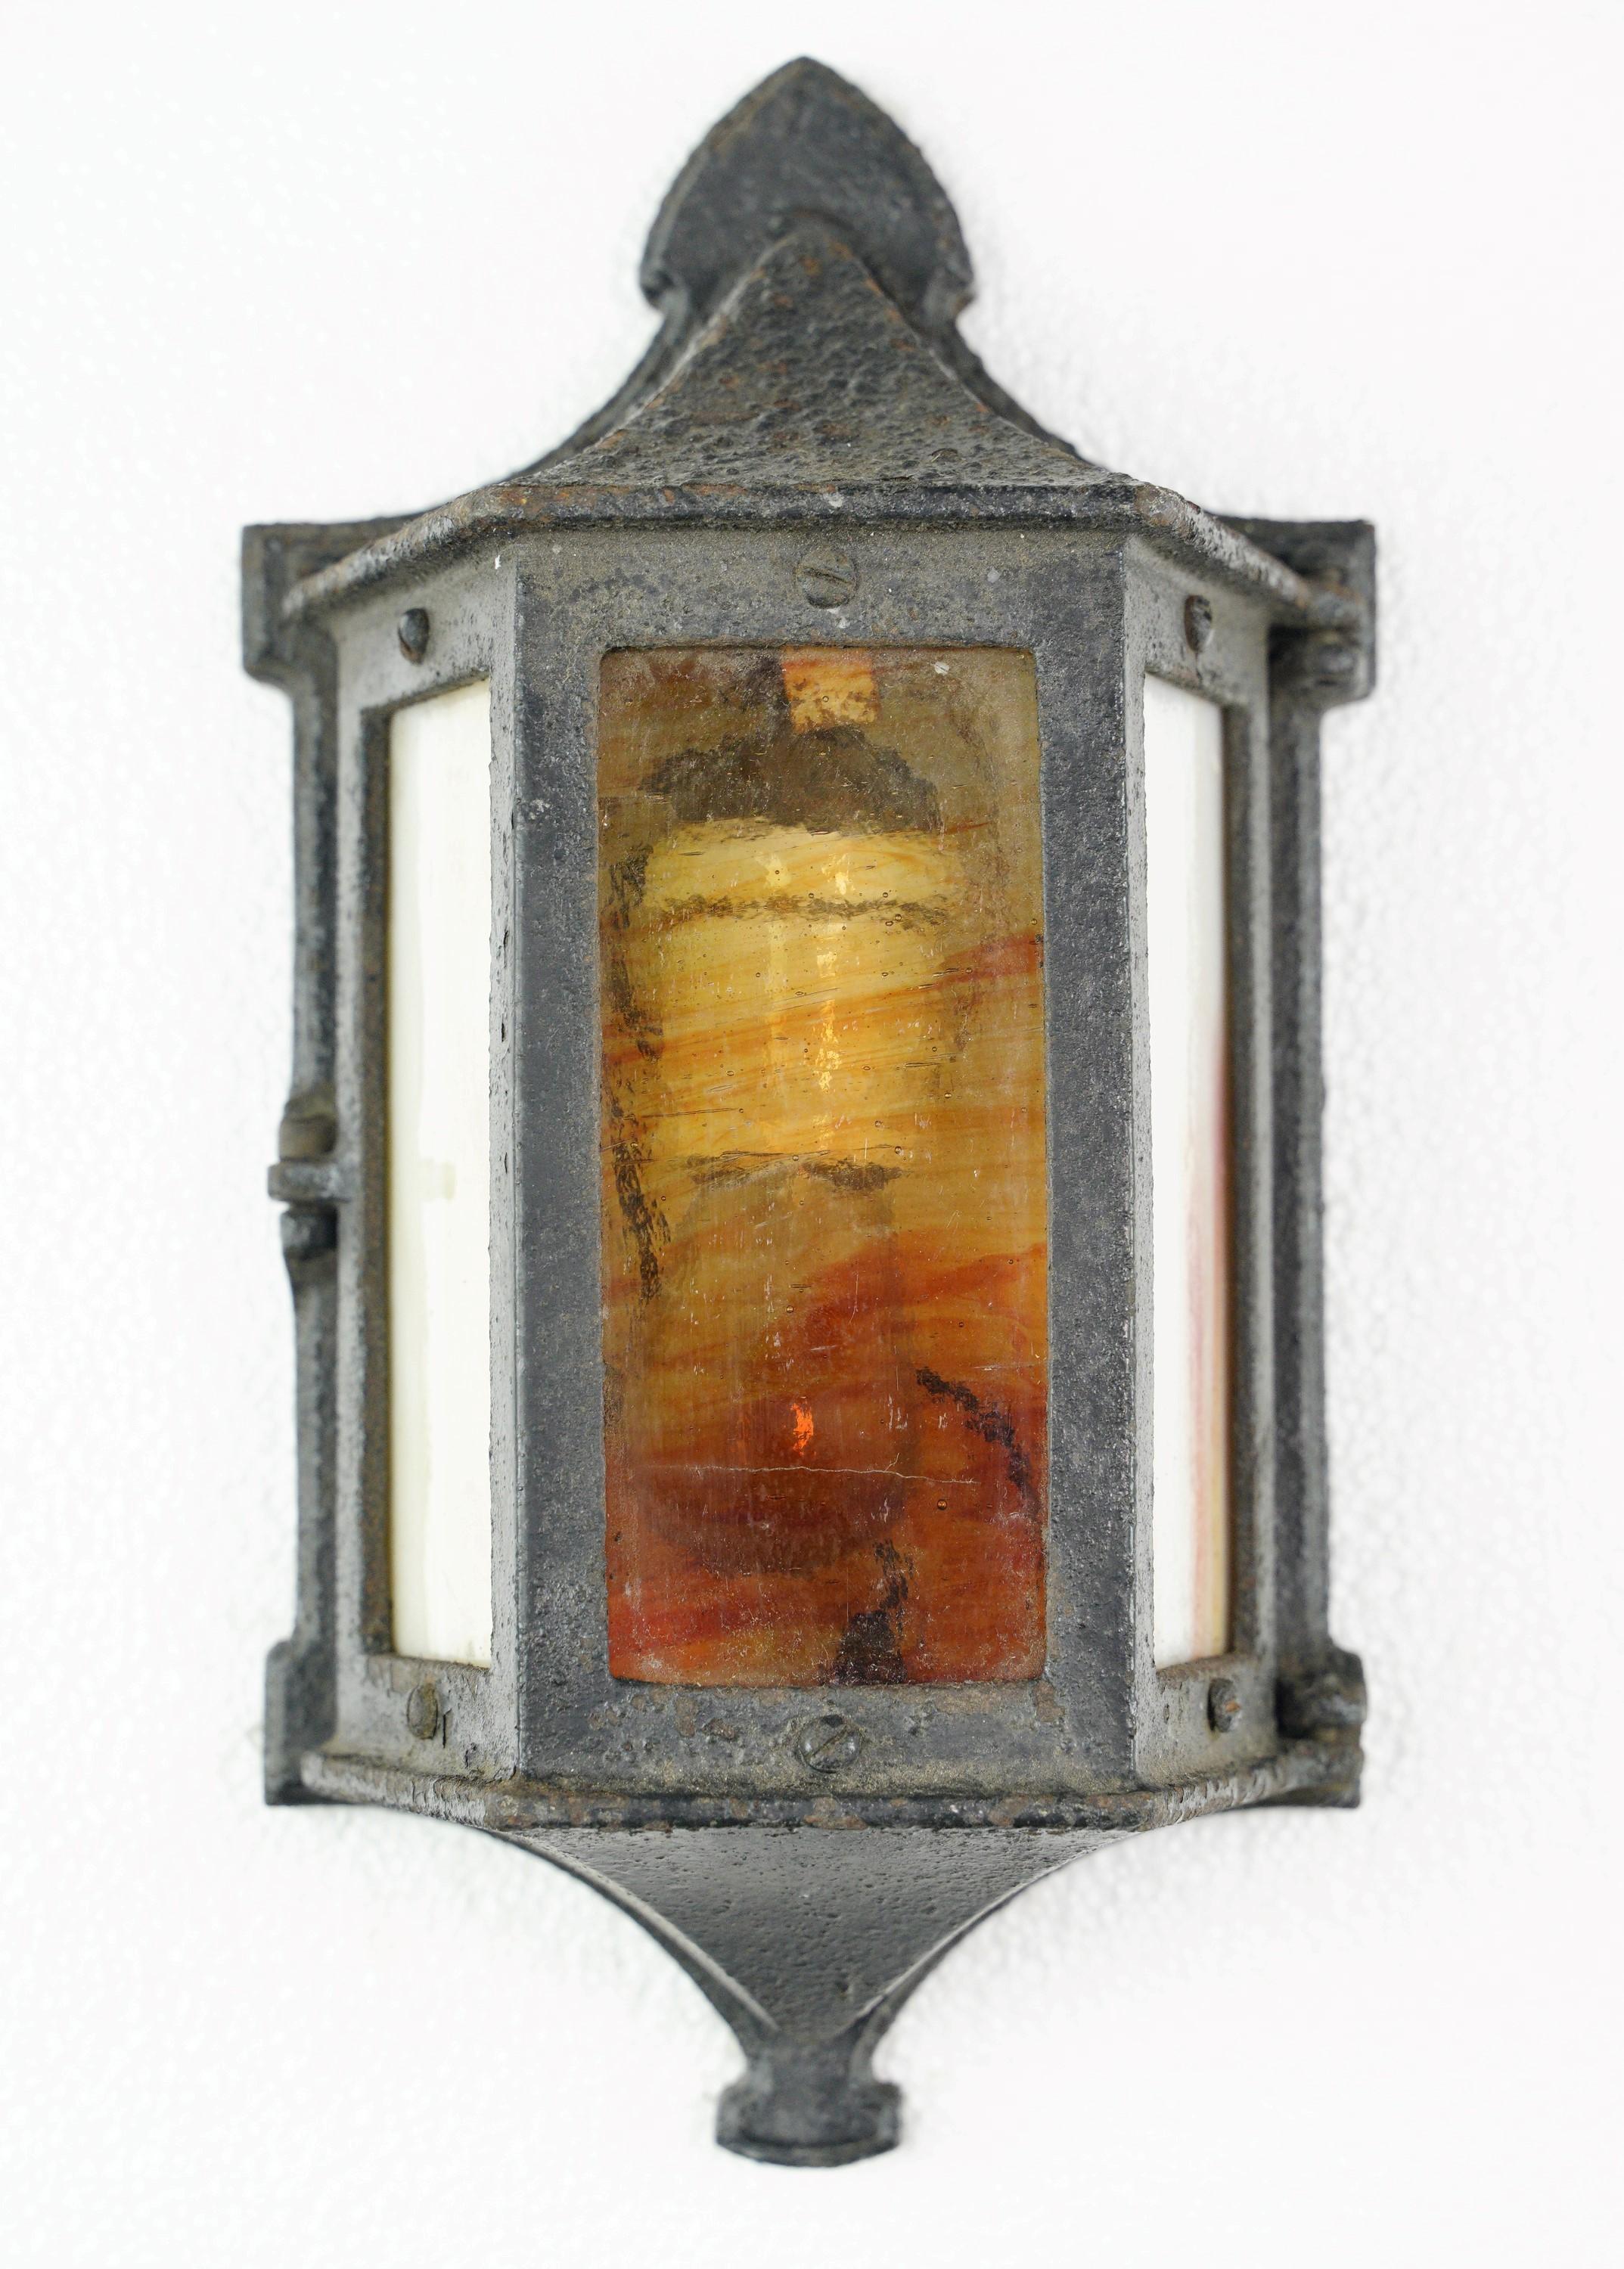 This pair of Art & Crafts cast iron and stained glass outdoor wall sconces beautifully blend artistic craftsmanship with functional outdoor lighting. They are in good condition and require one single standard medium base lightbulb. Cleaned and